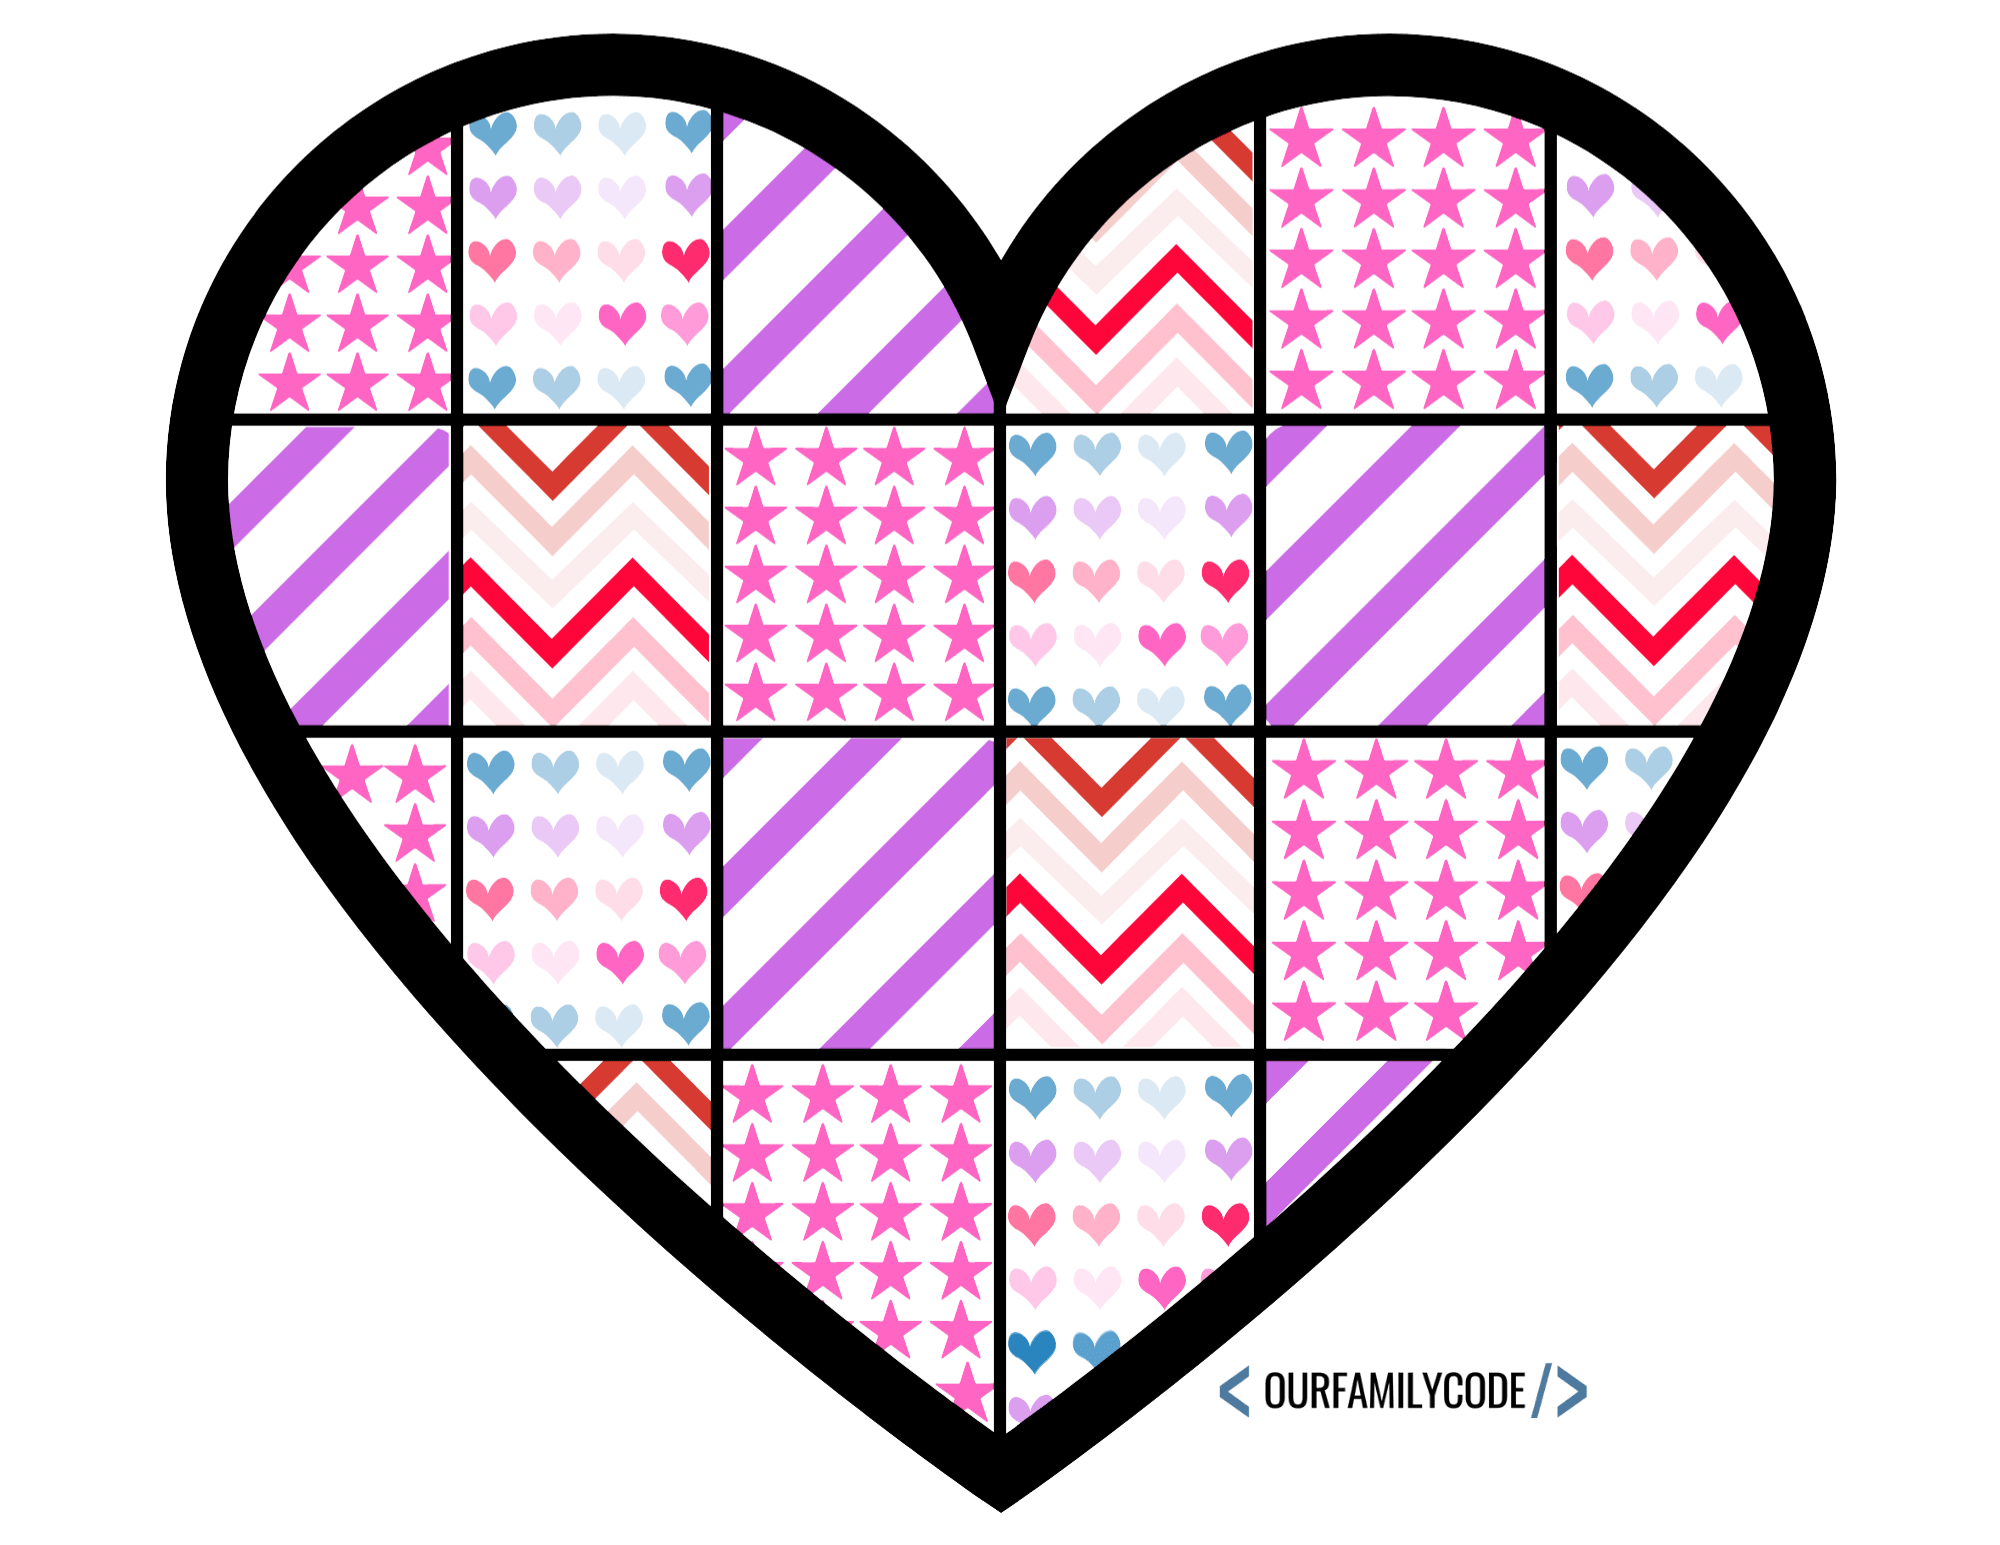 A picture of a digital Patchwork Heart Logic Activity completed.